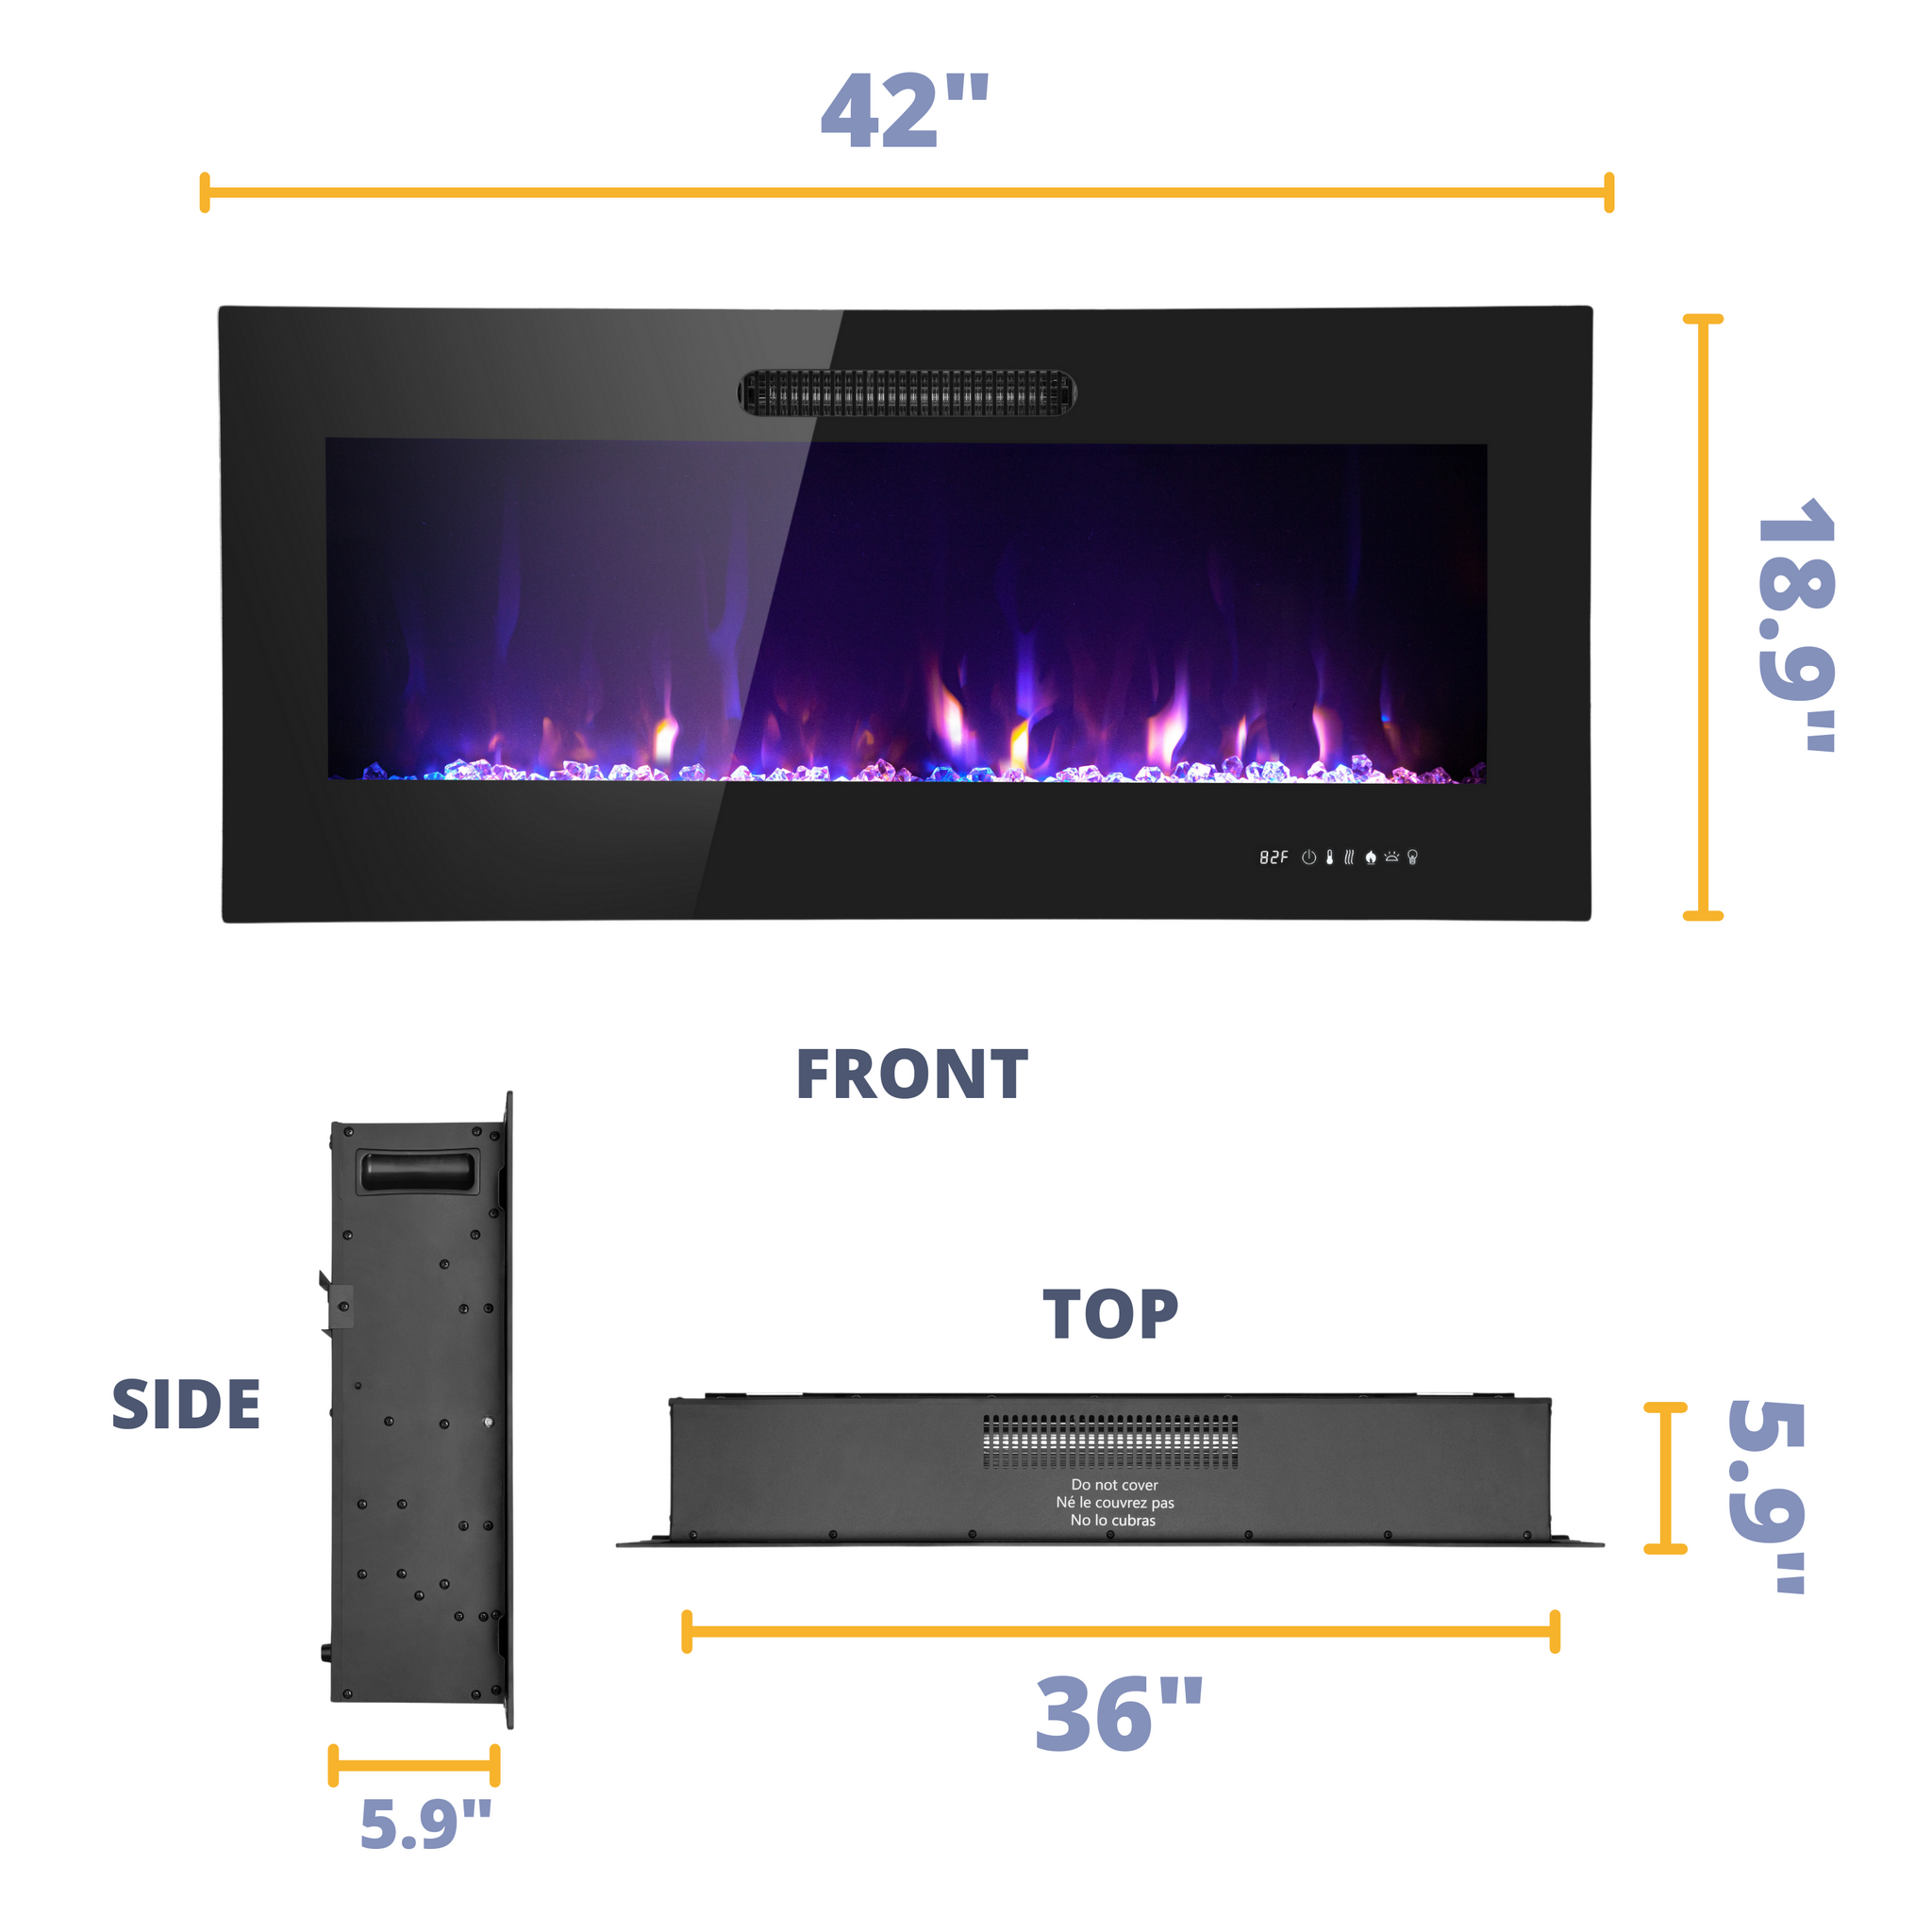 42 Inch LED Slim Design Electric Fireplace Insert and Wall Mounted Fireplace with 1500 Watt Heater, Log & Crystal Ember Options, Adjustable Realistic Flame and Remote Control by Prominence Home